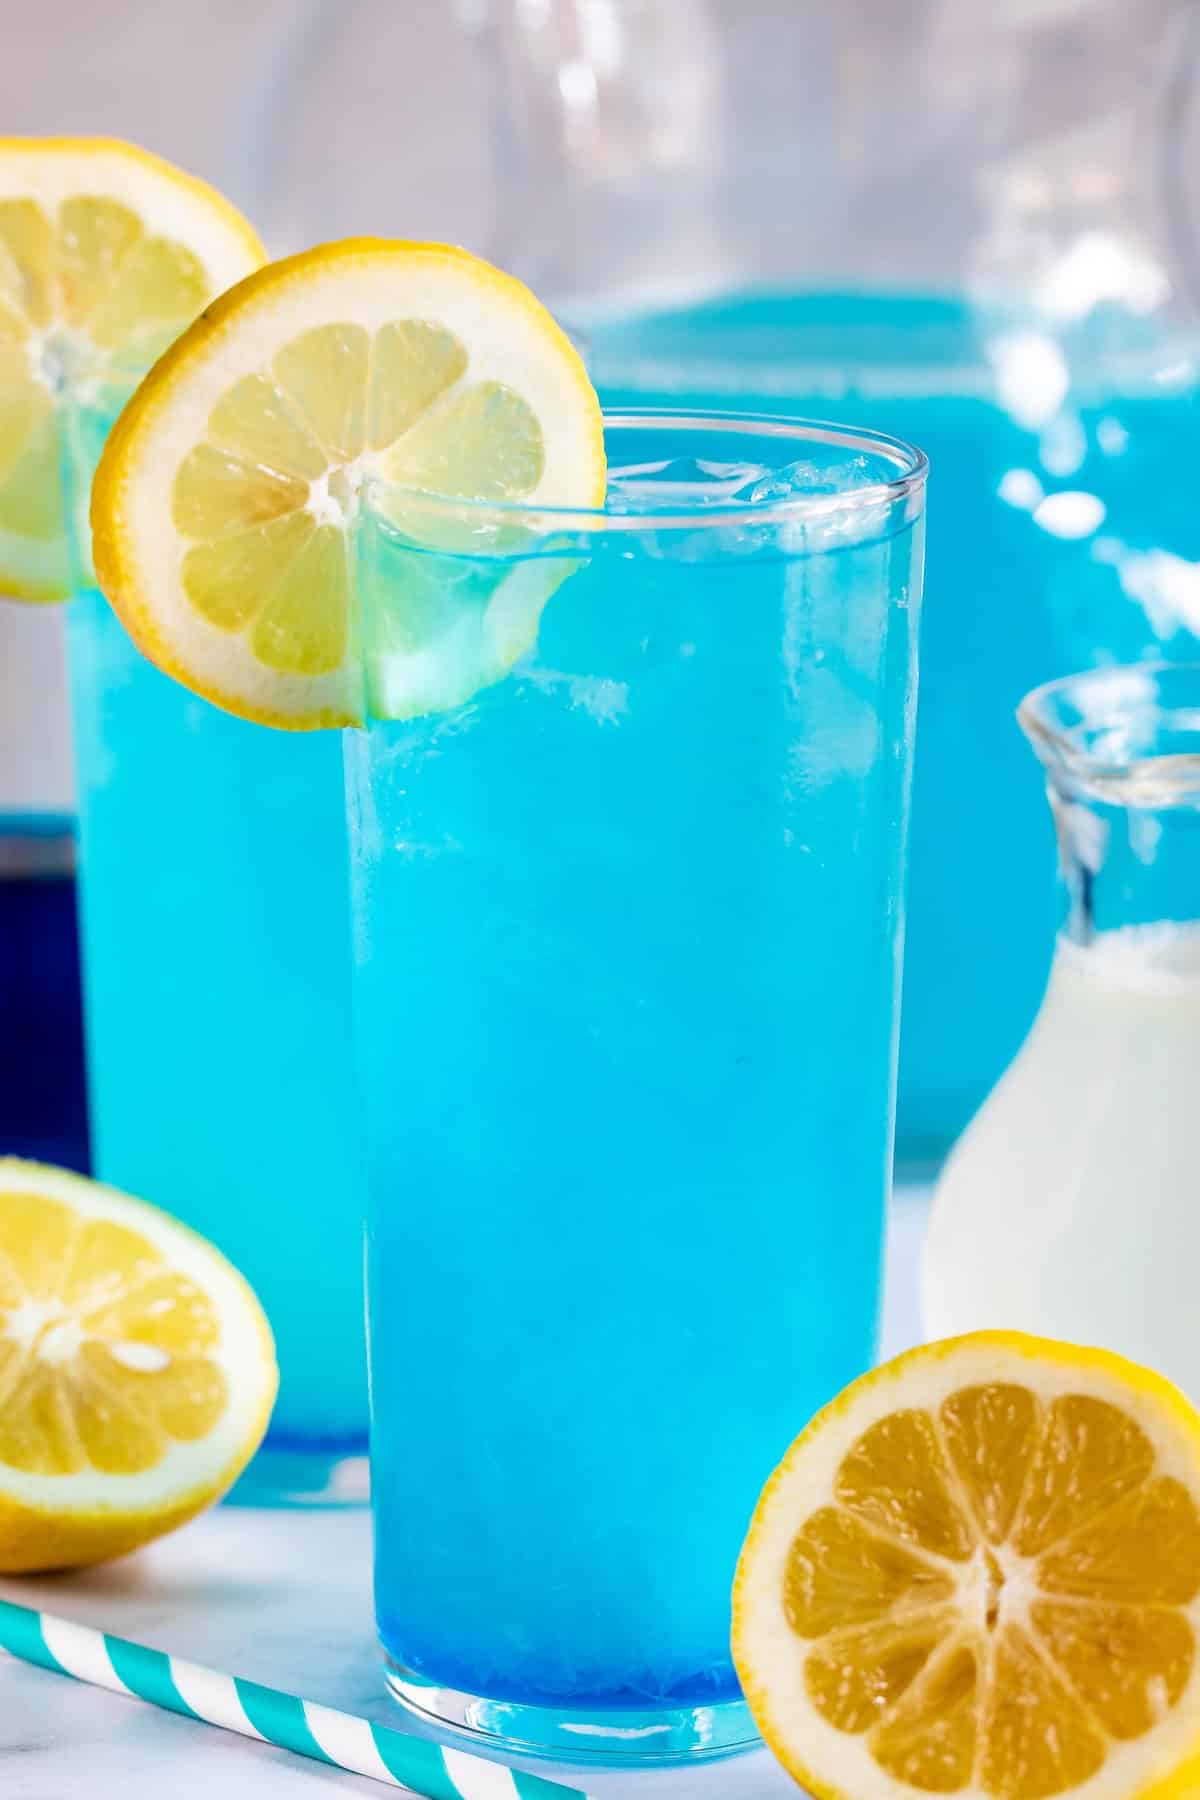 tall clear glass with a bright blue drink inside and a lemon slice on the rim.